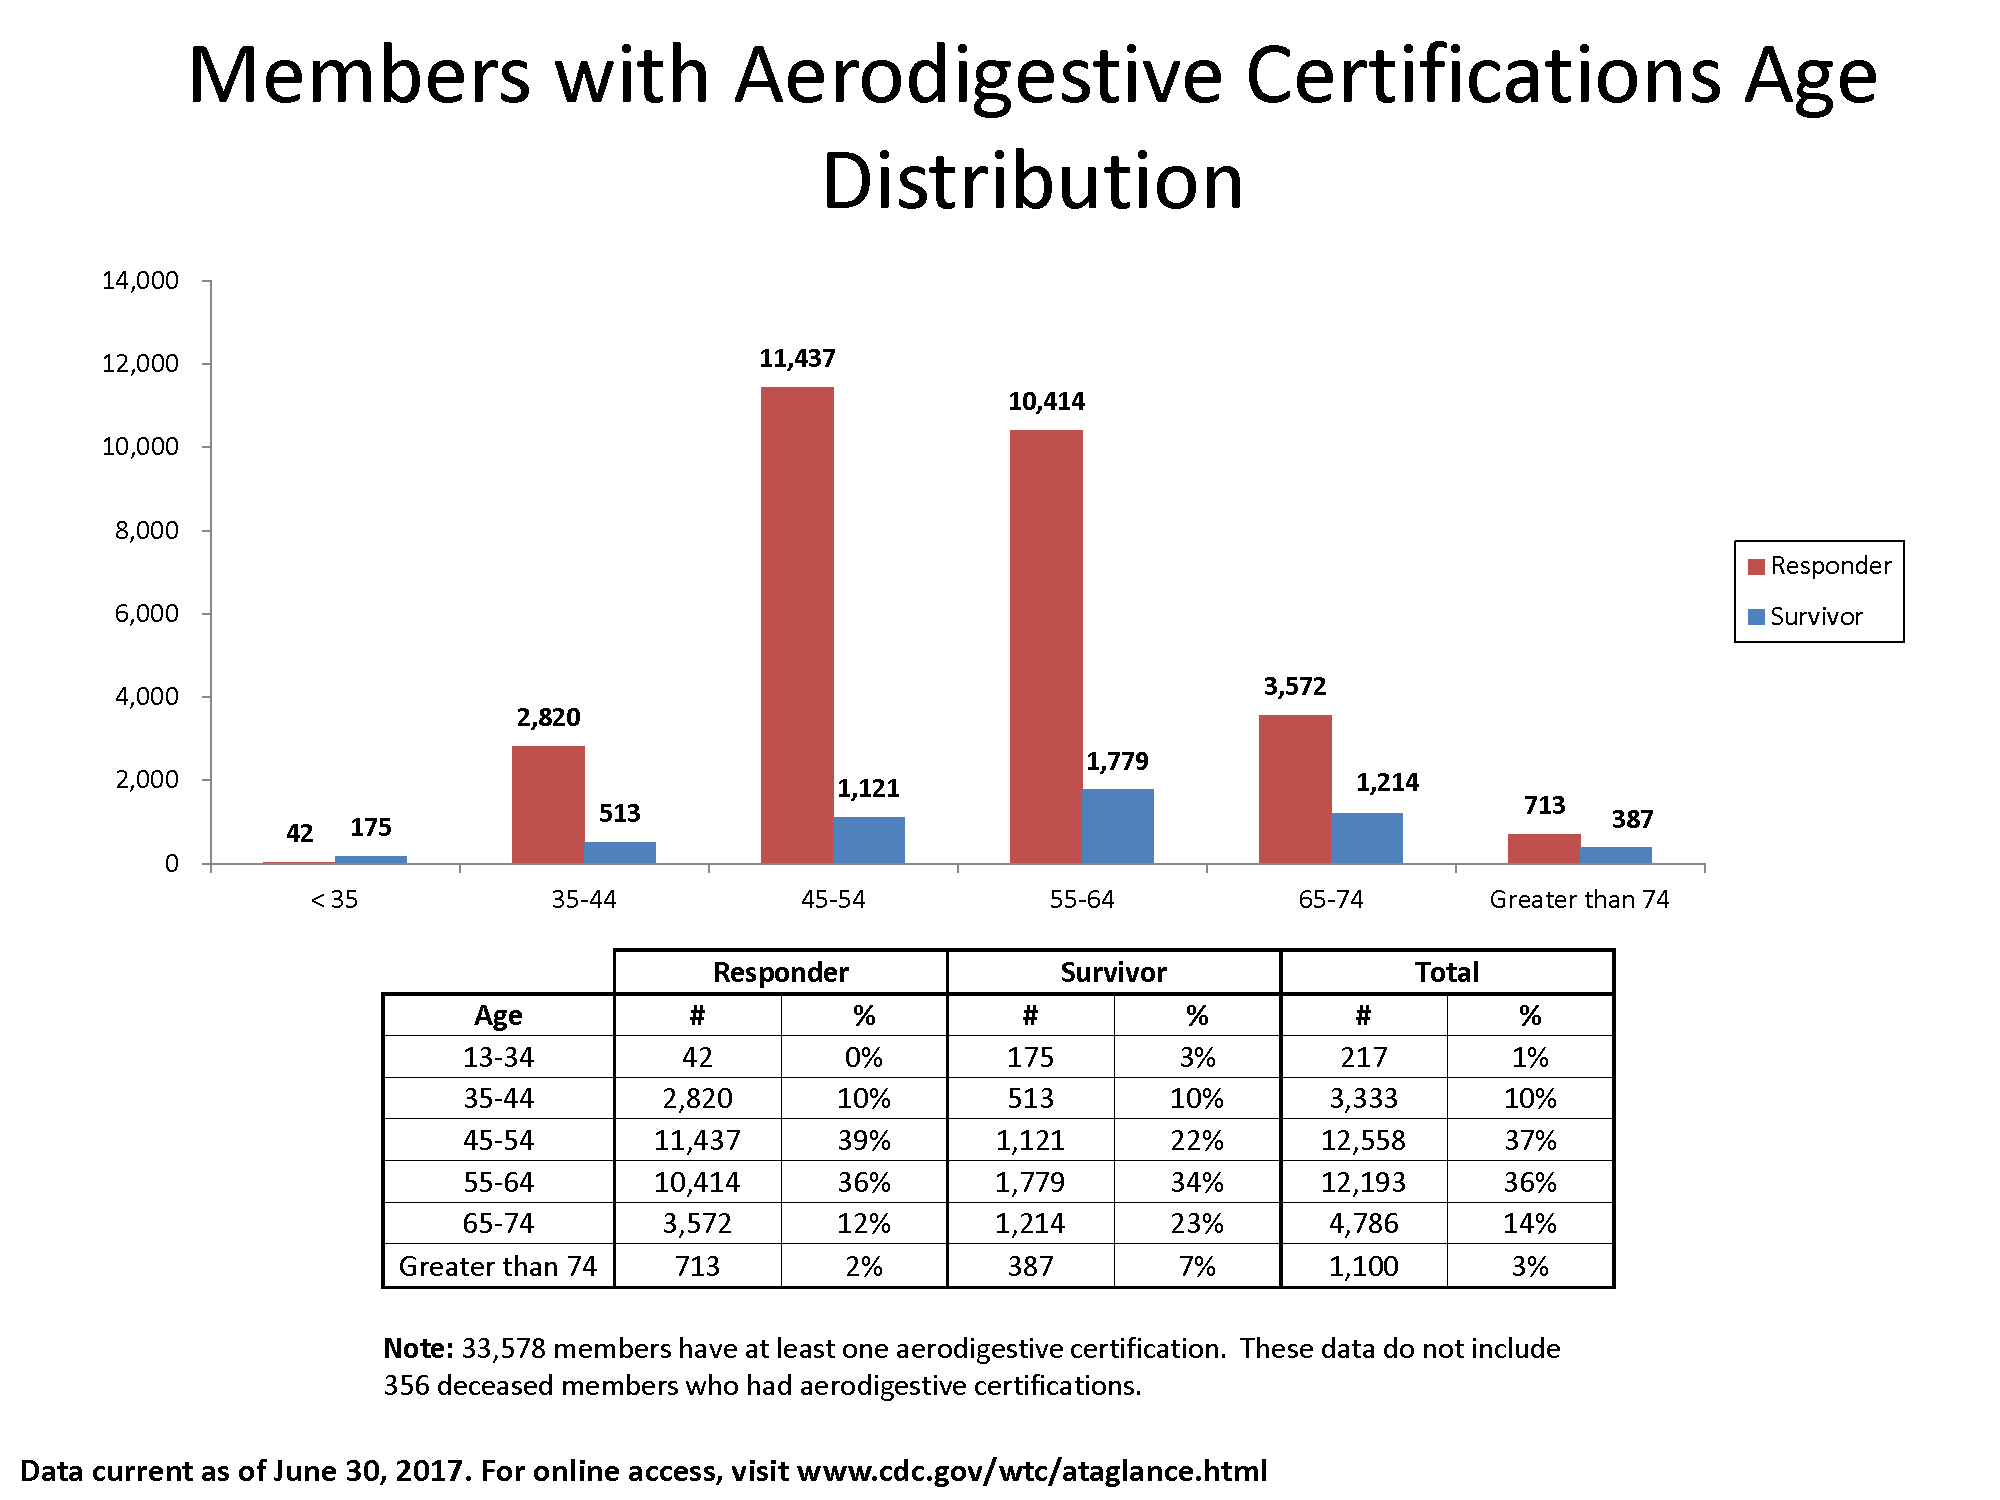 Bar chart of data in the table showing the number of members with aerodigestive certifications by Responder and Survivor and age bracket.